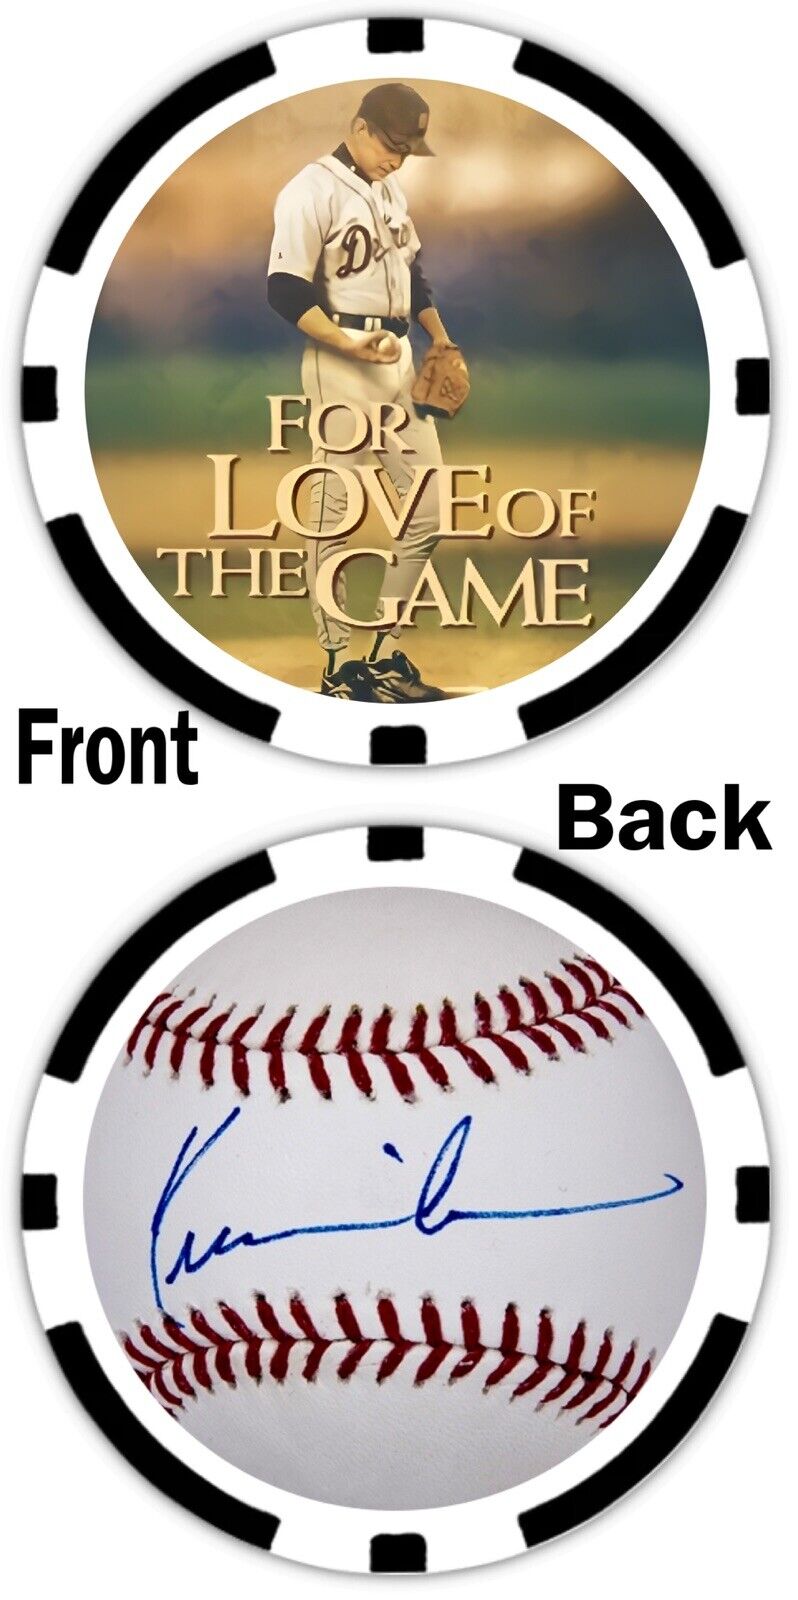 KEVIN COSTNER - FOR THE LOVE OF THE GAME - POKER CHIP - ***SIGNED***